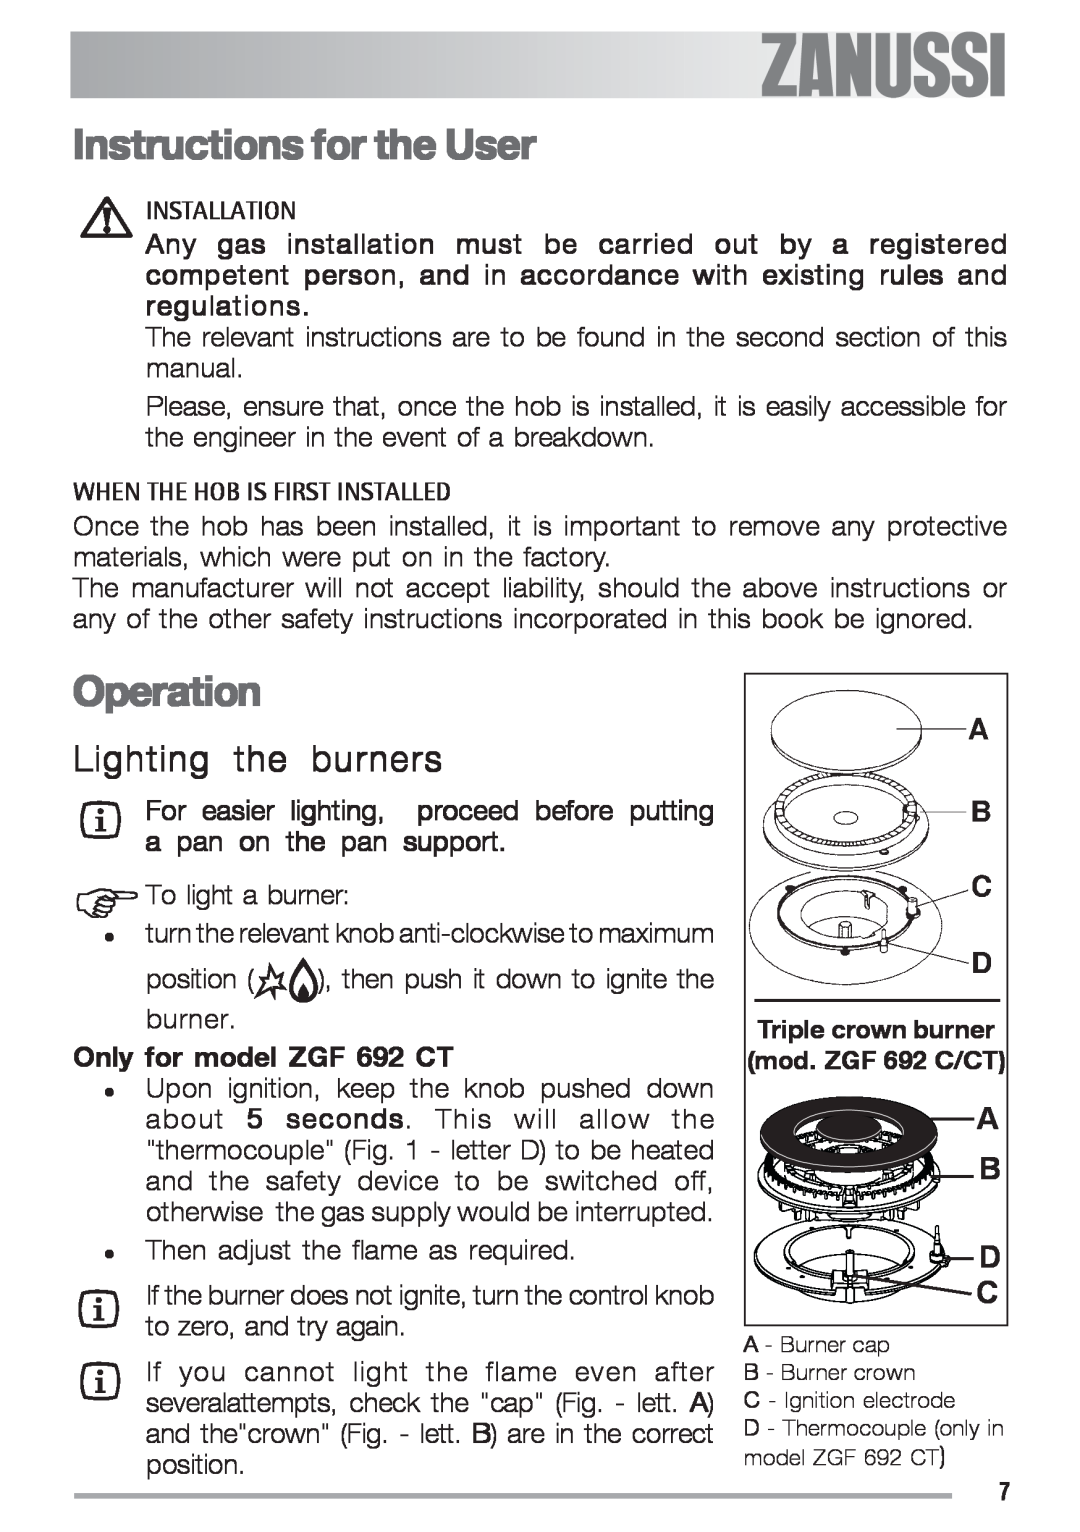 Zanussi ZGF 692 CT manual Instructions for the User, Operation, Lighting, burners 